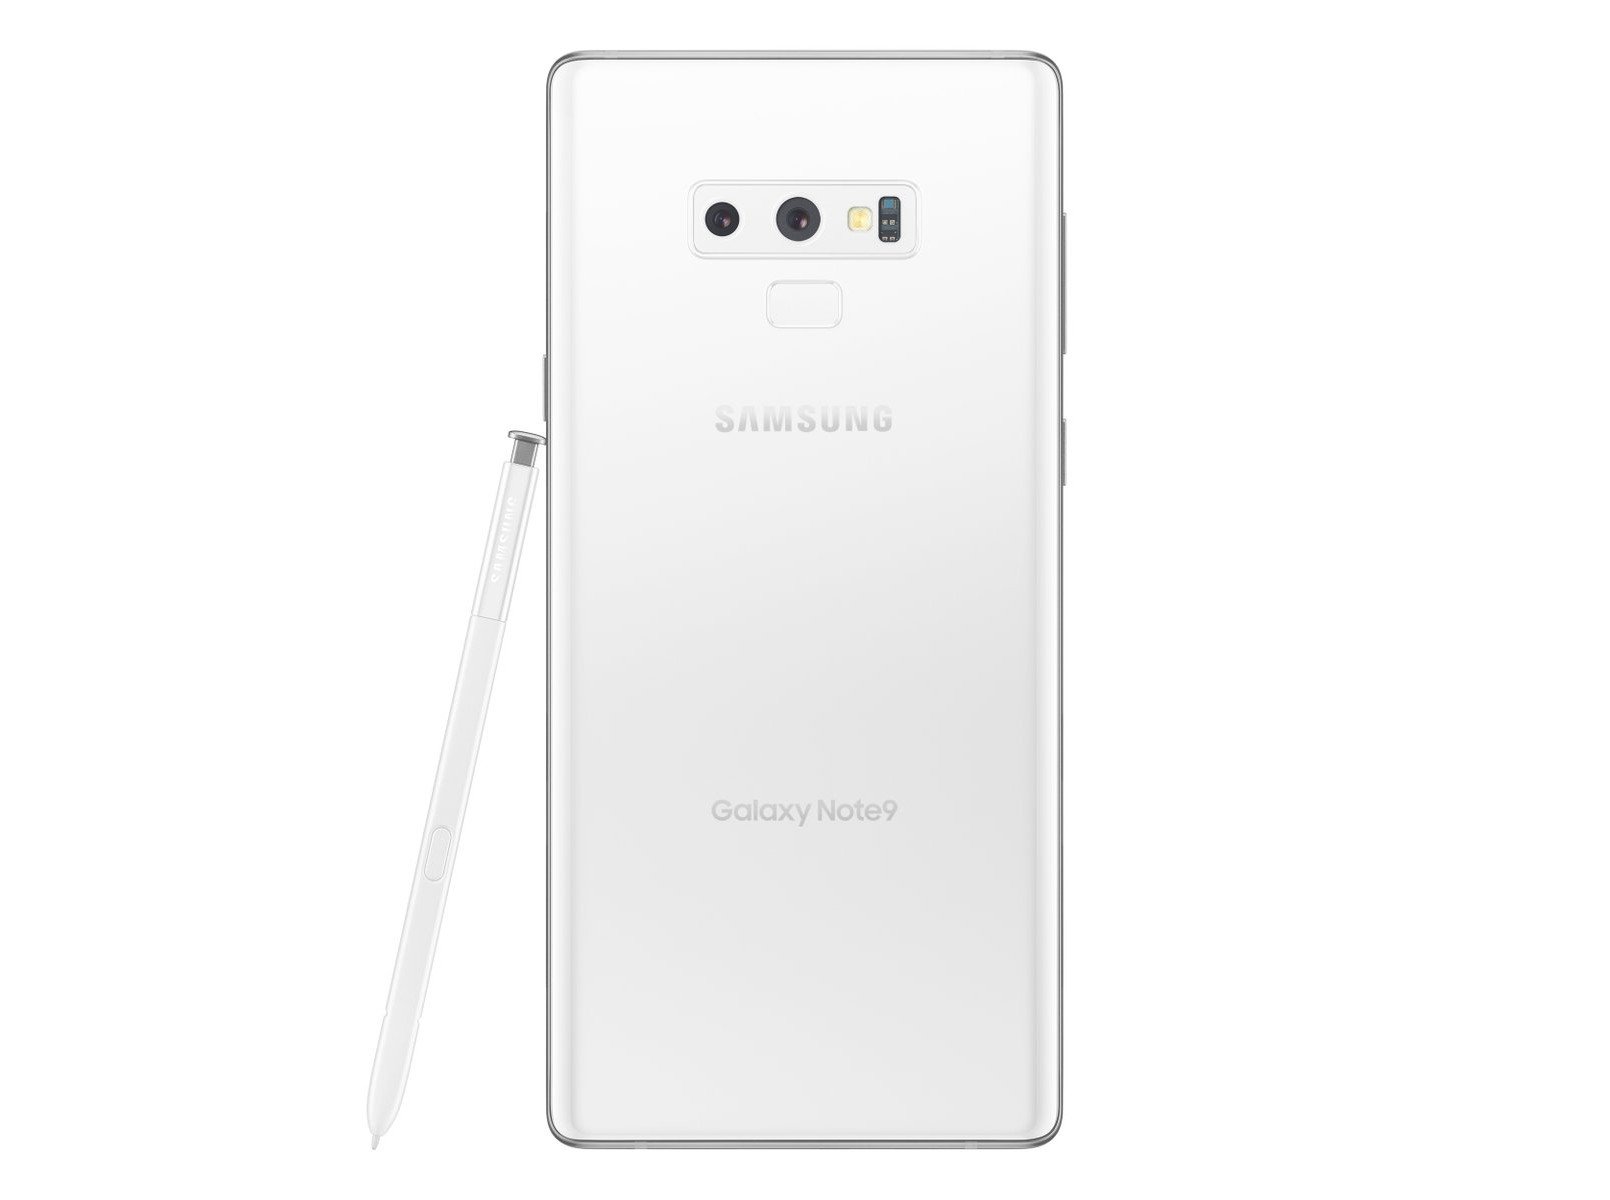 Samsung Galaxy Note9 in White may have leaked